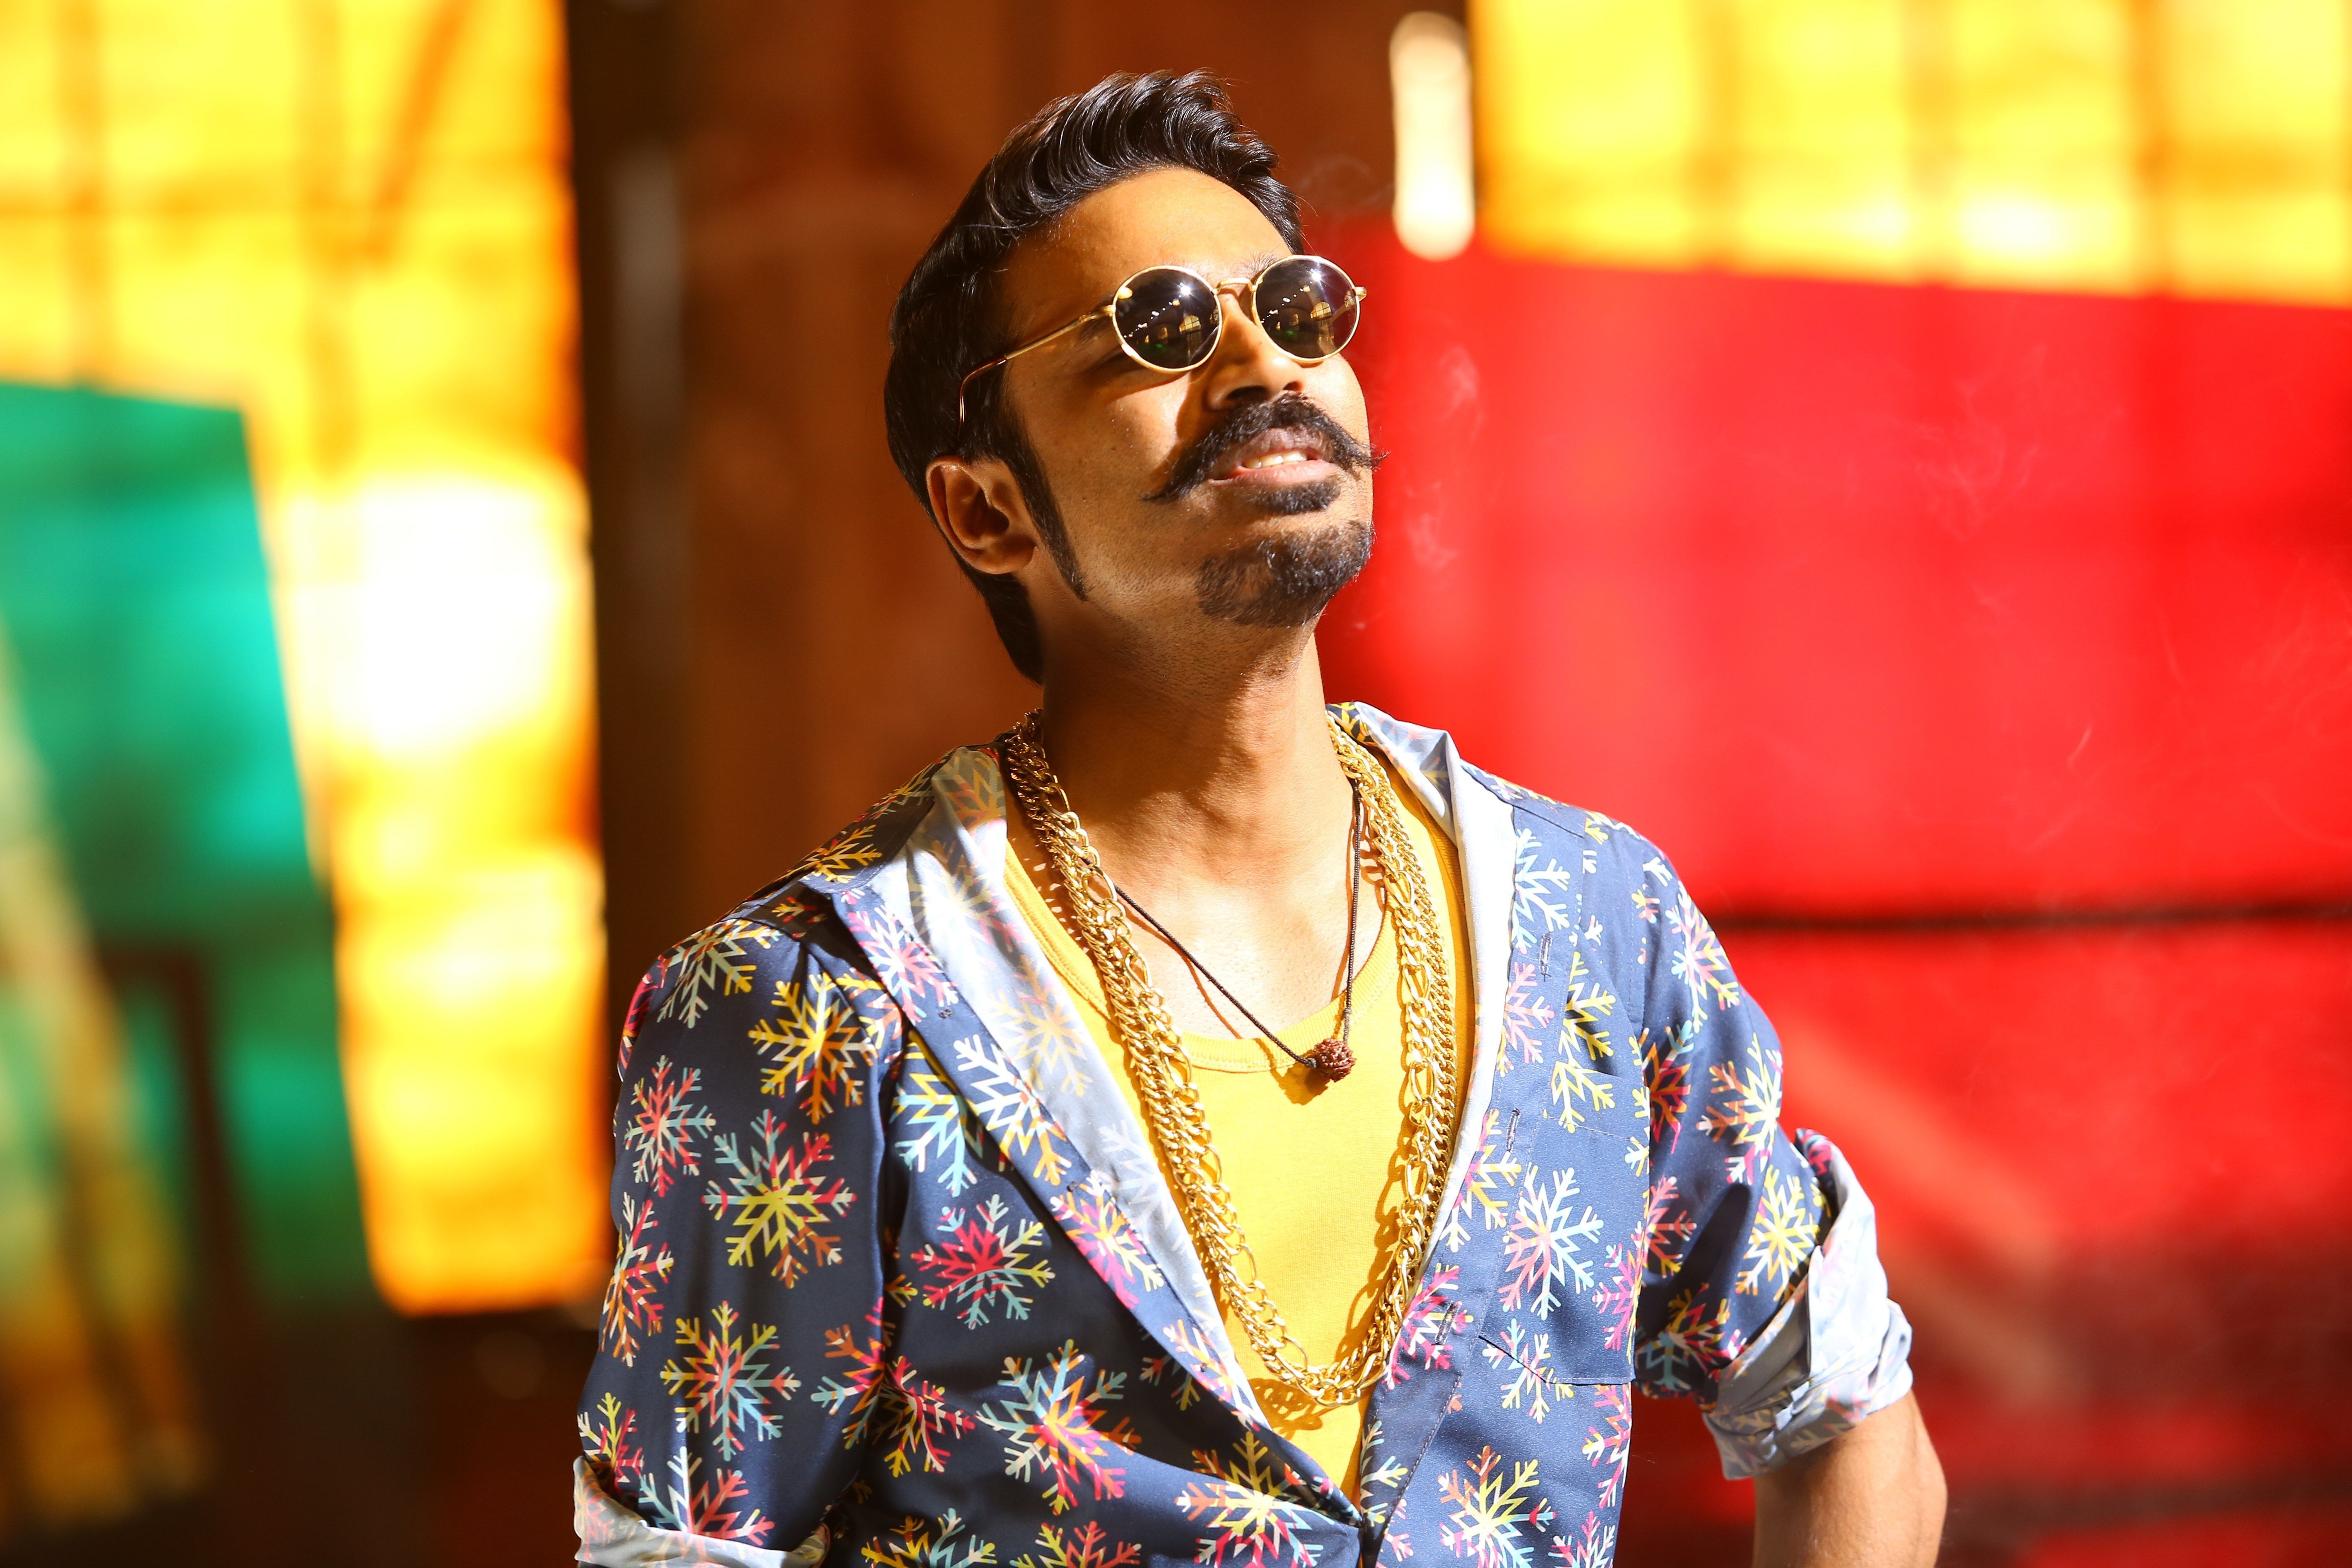 Dhanush Photo With Colorful Background